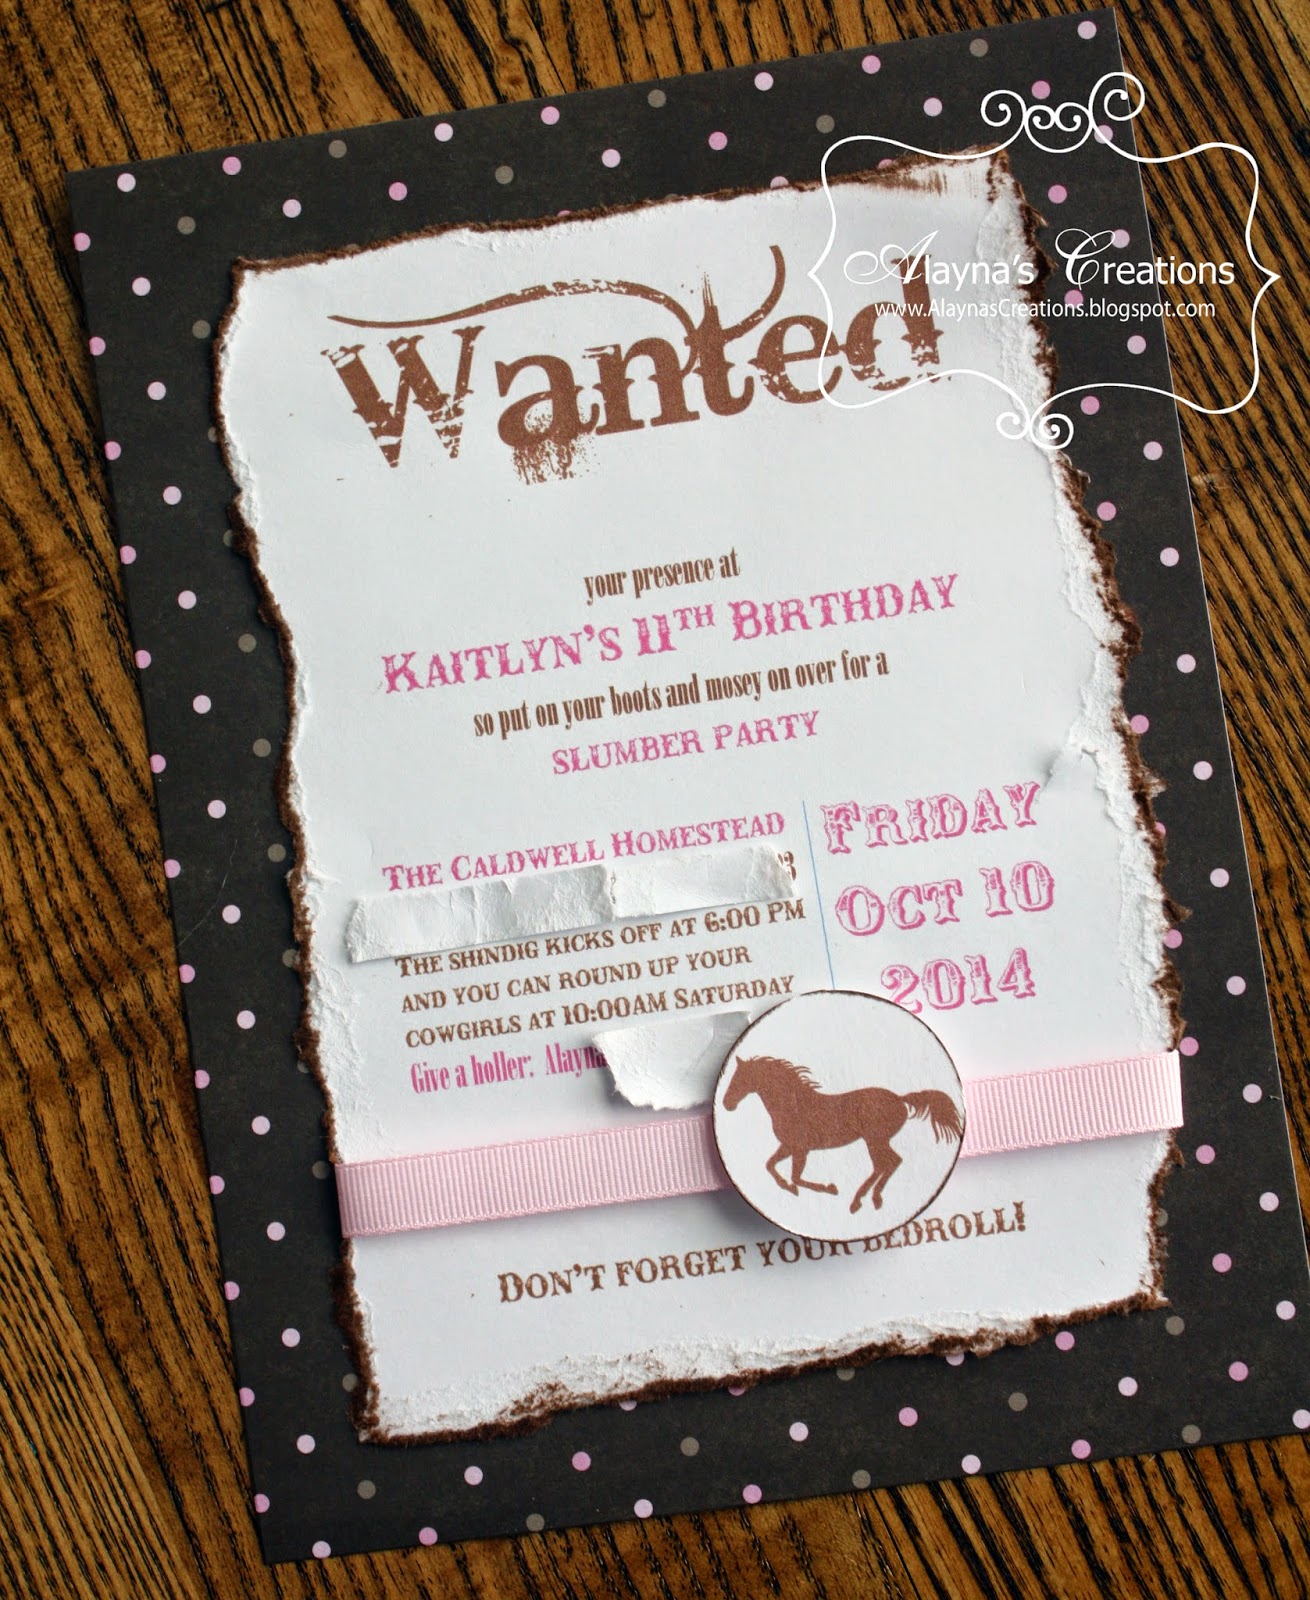 alayna-s-creations-horse-party-invitations